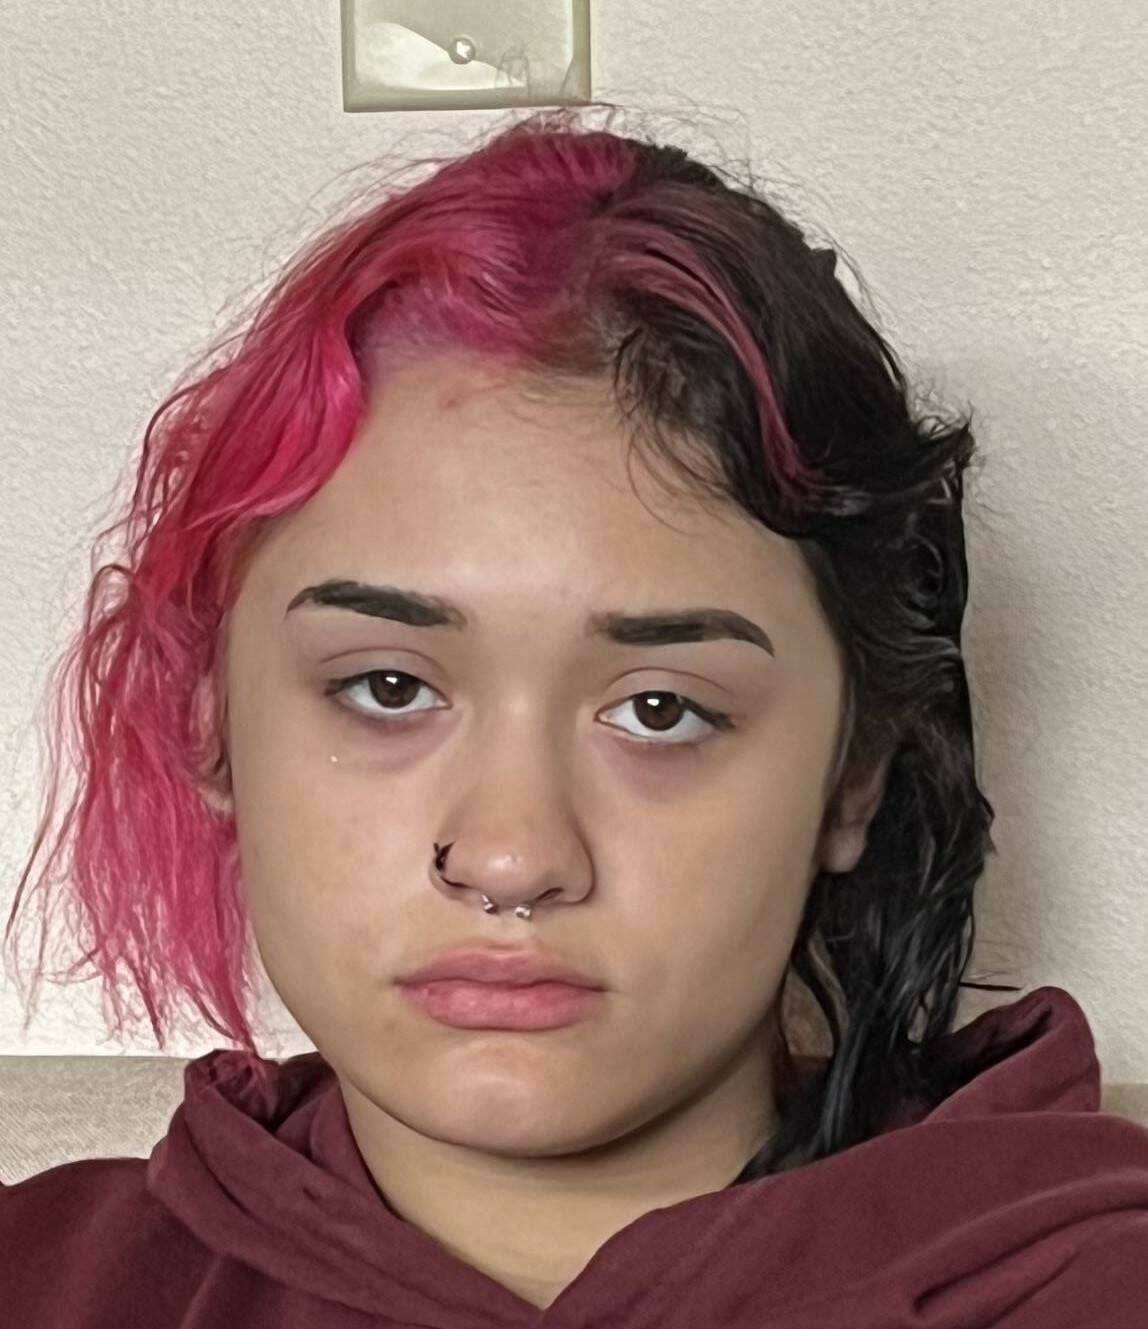 Aberdeen police are seeking information on the whereabouts of 15-year-old Auriaunna A. Fernandez, last seen in East Aberdeen on Tuesday afternoon. (Courtesy photo / Aberdeen Police Department)